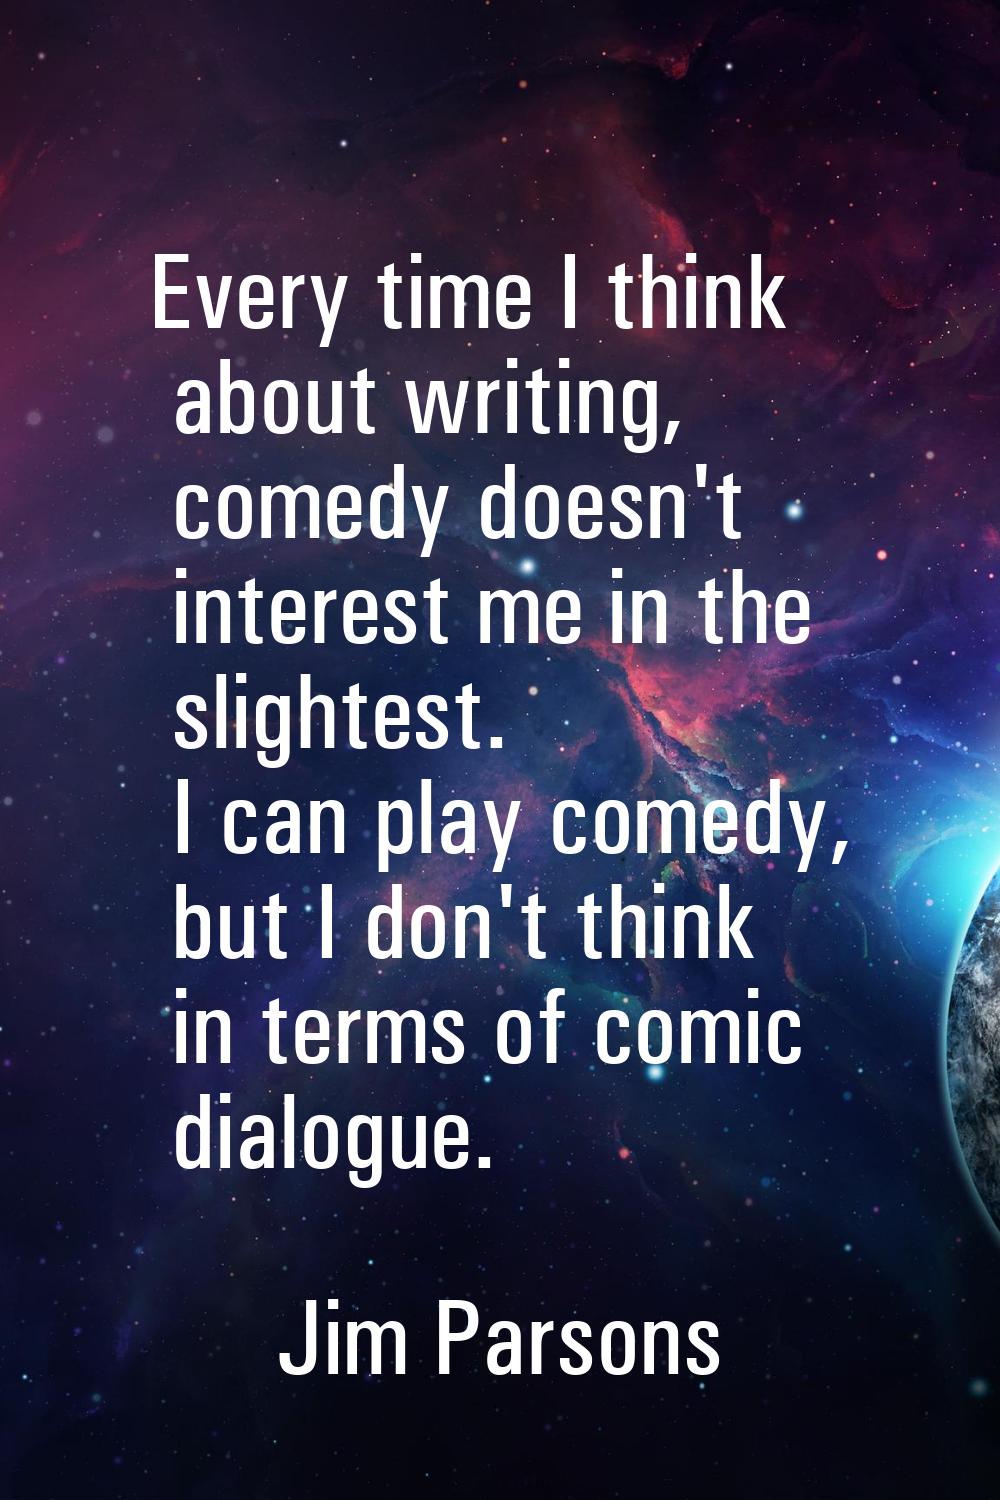 Every time I think about writing, comedy doesn't interest me in the slightest. I can play comedy, b